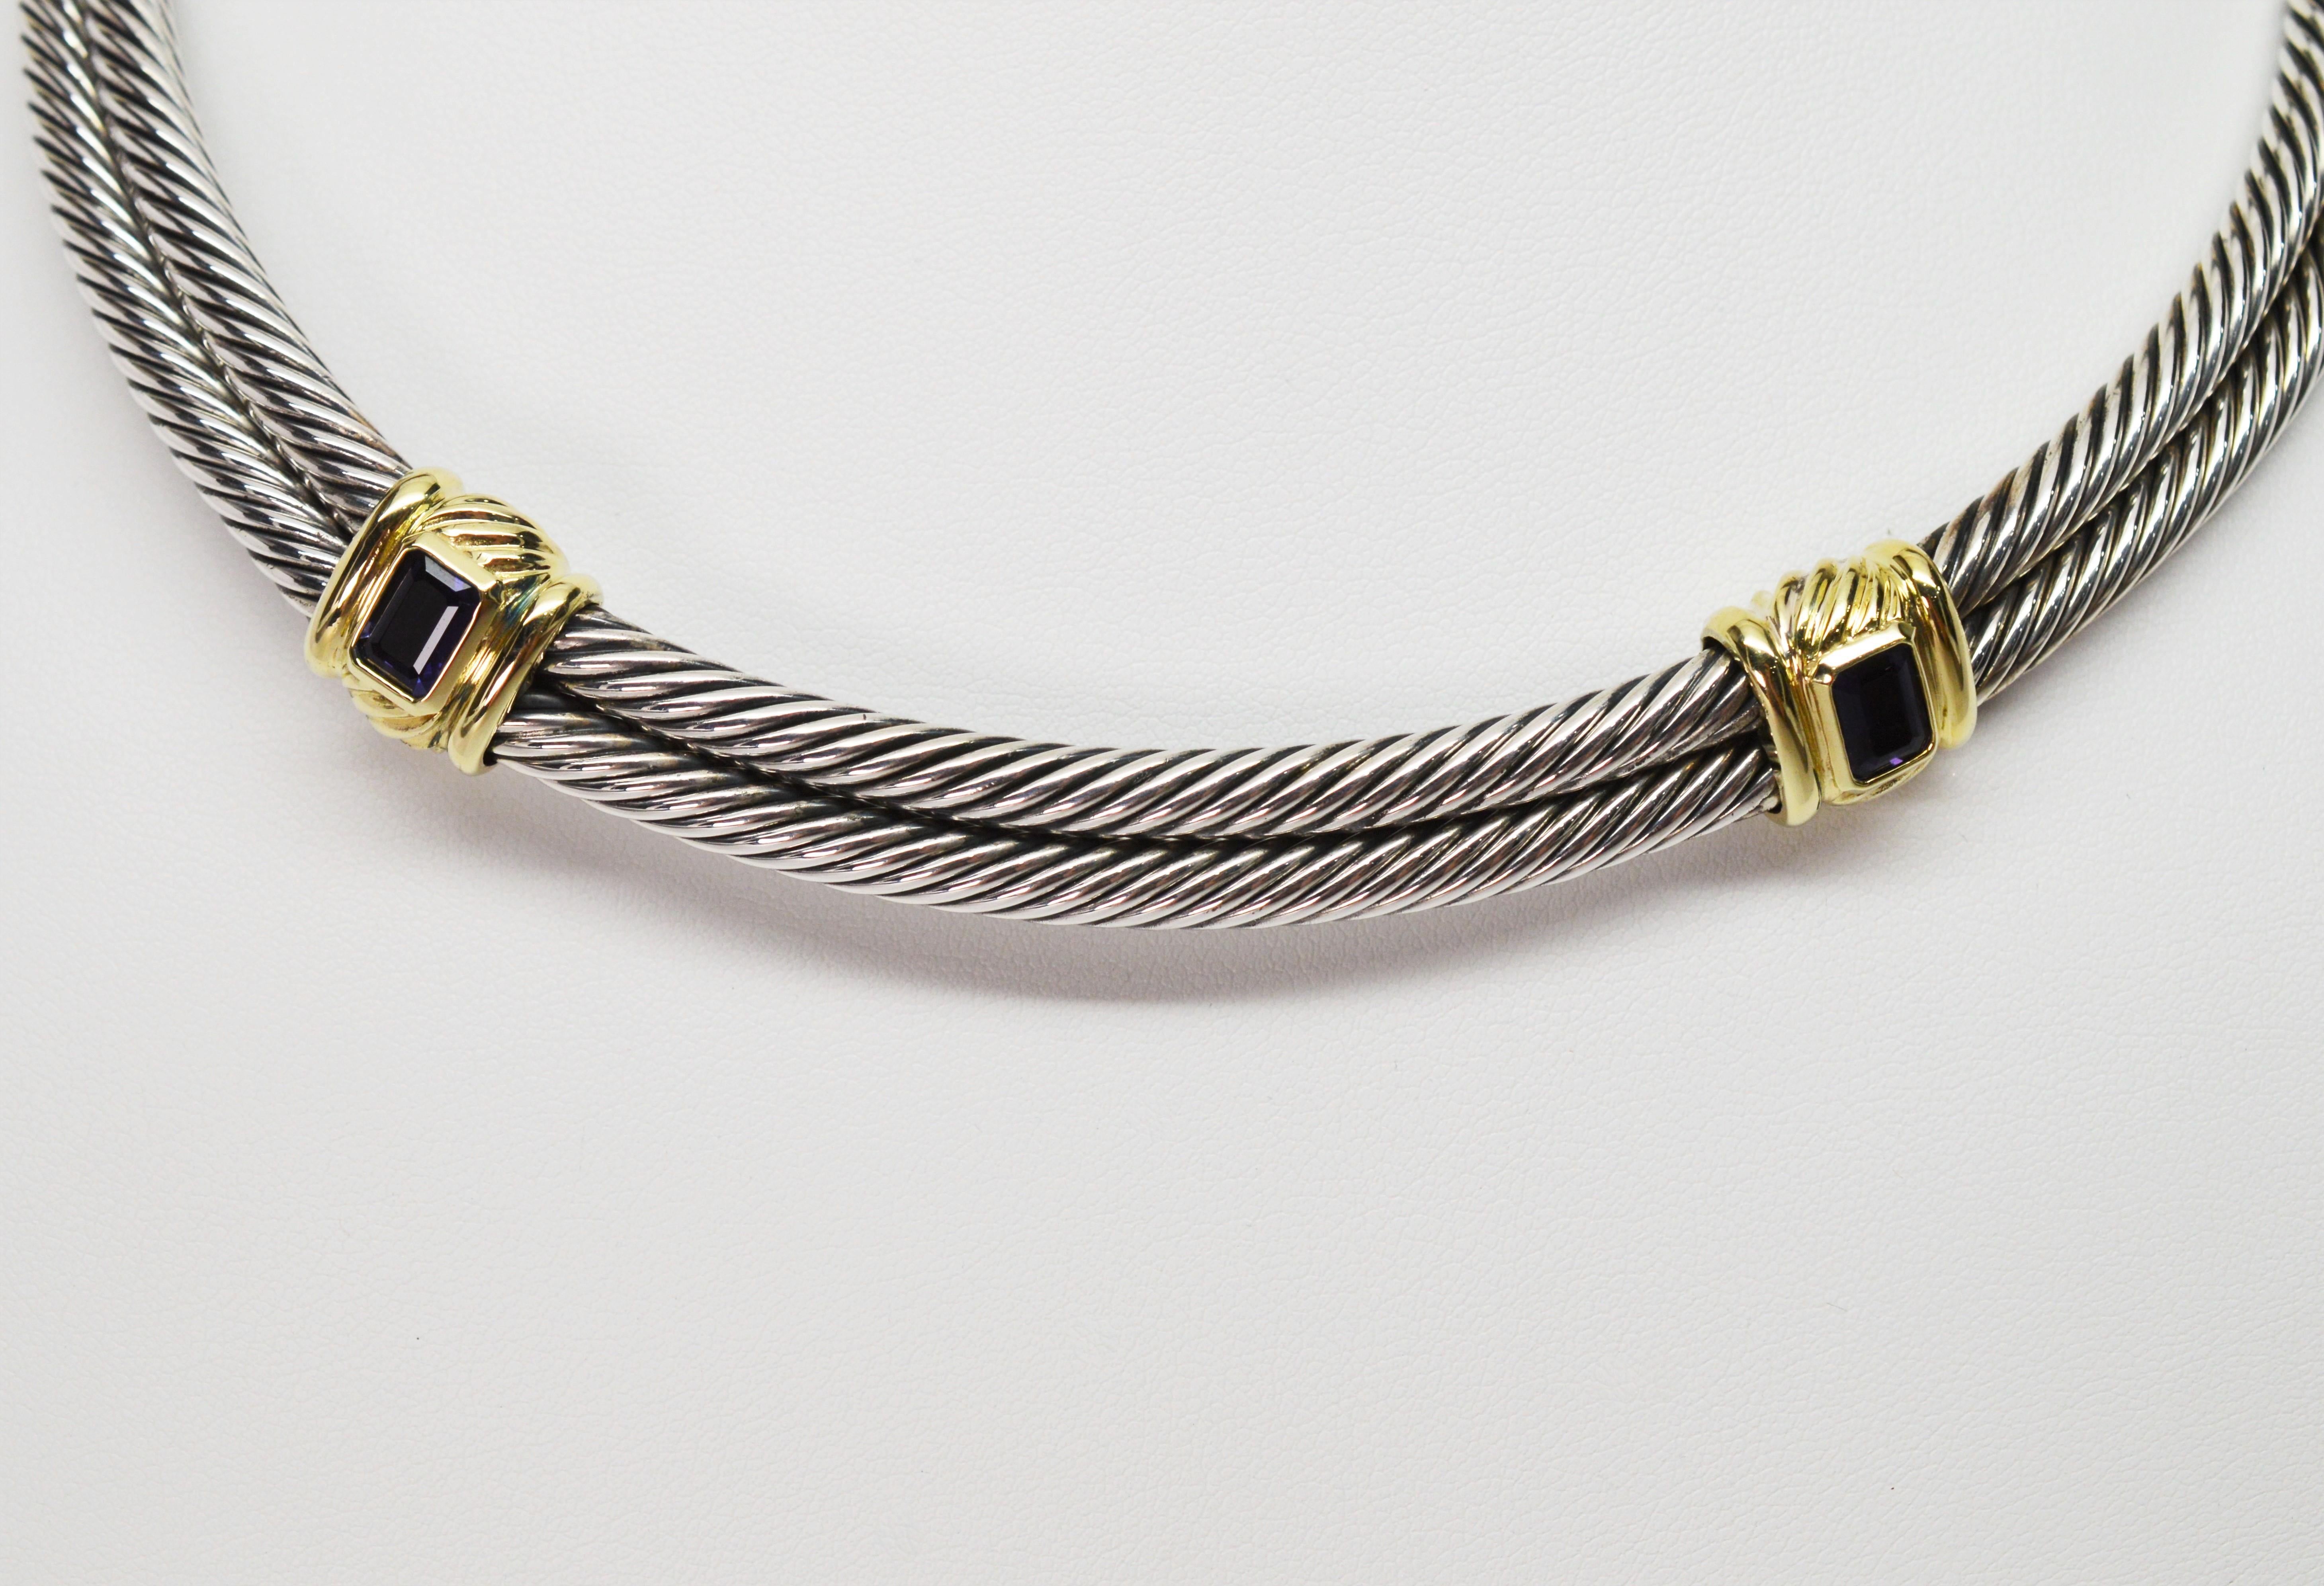 A stunning statement piece by well known jewelry designer David Yurman. Twin lengths of flexible polished sterling silver twisted cable chain create this stylish structured collar piece measuring 5-1/4 inches diameter and with a 15 inch